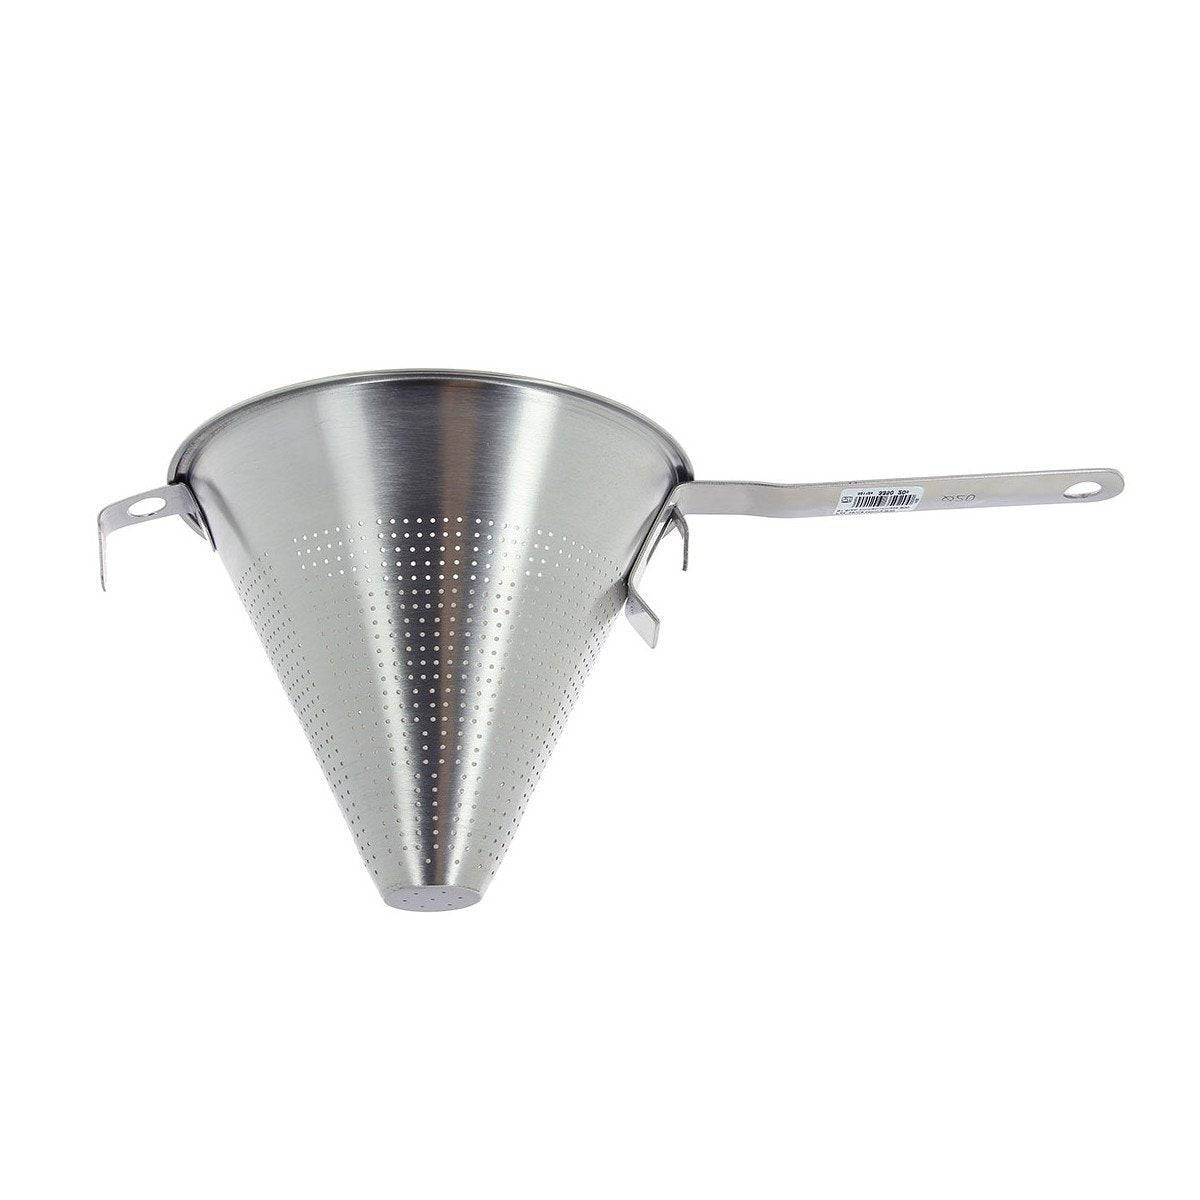 de Buyer Stainless Steel Chinese Strainer, 7.9-Inches - Kitchen Universe